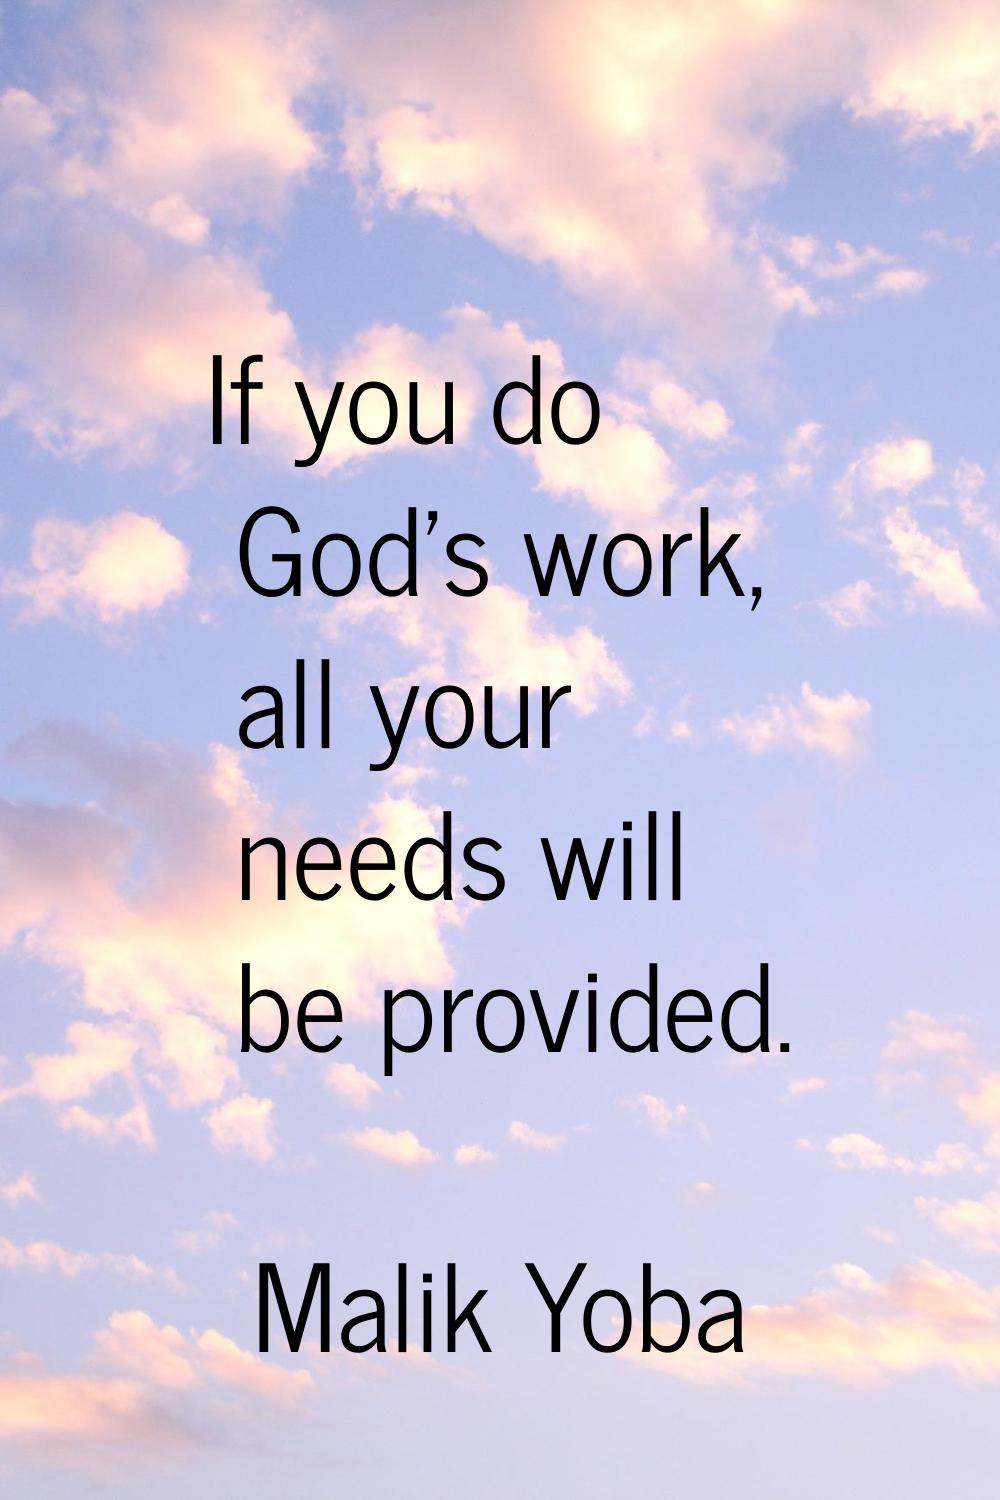 If you do God's work, all your needs will be provided.